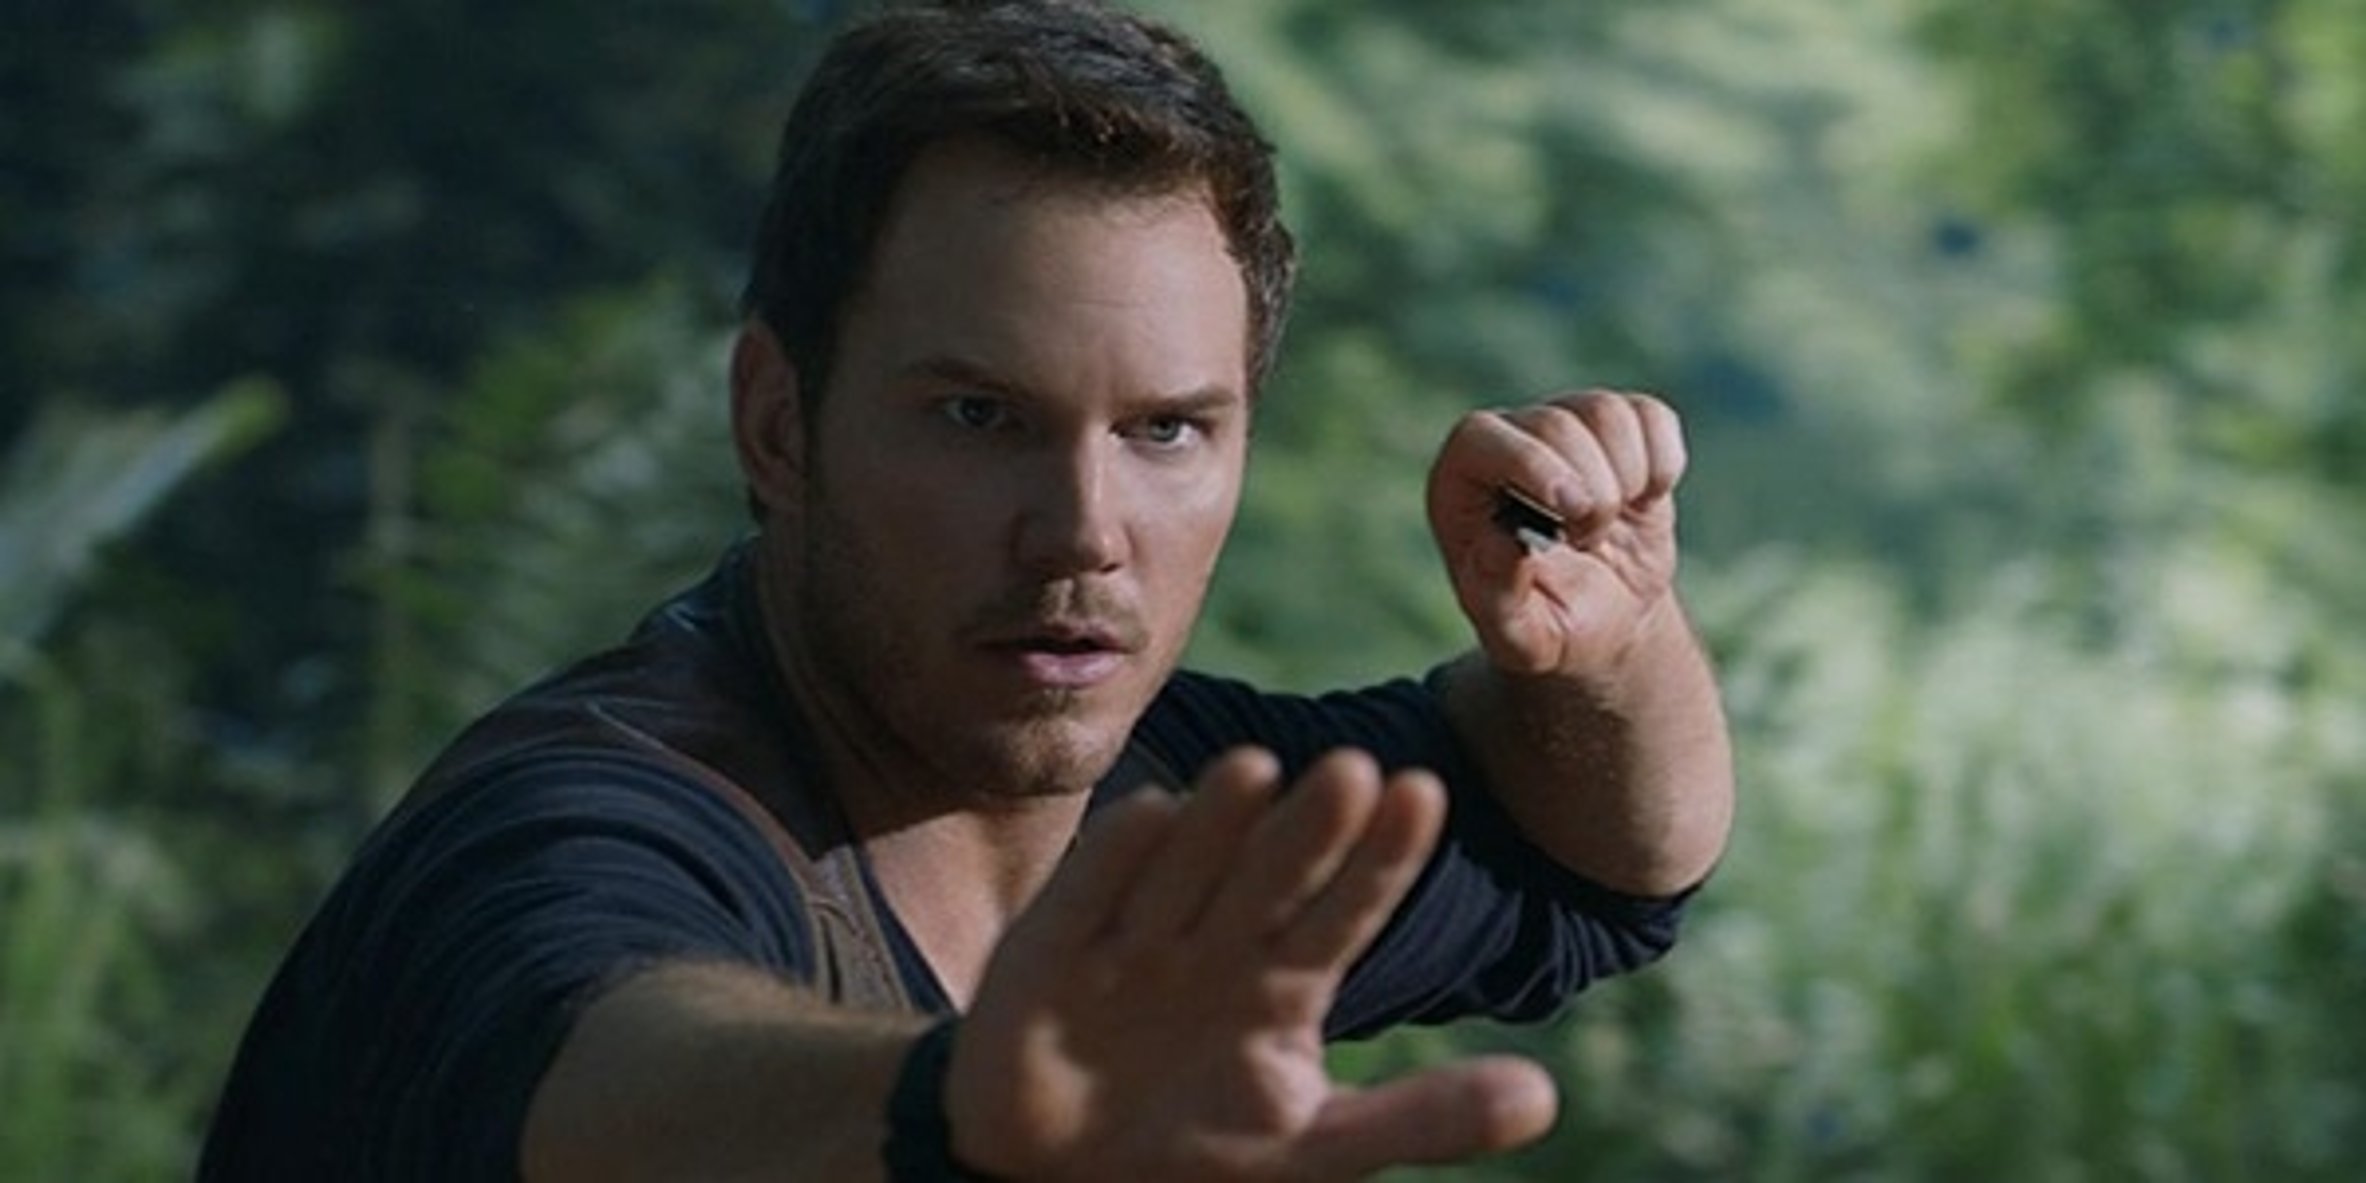 Jurassic World: Dominion Director Shares How Filming The Movie Was An Experience He’d Never Had